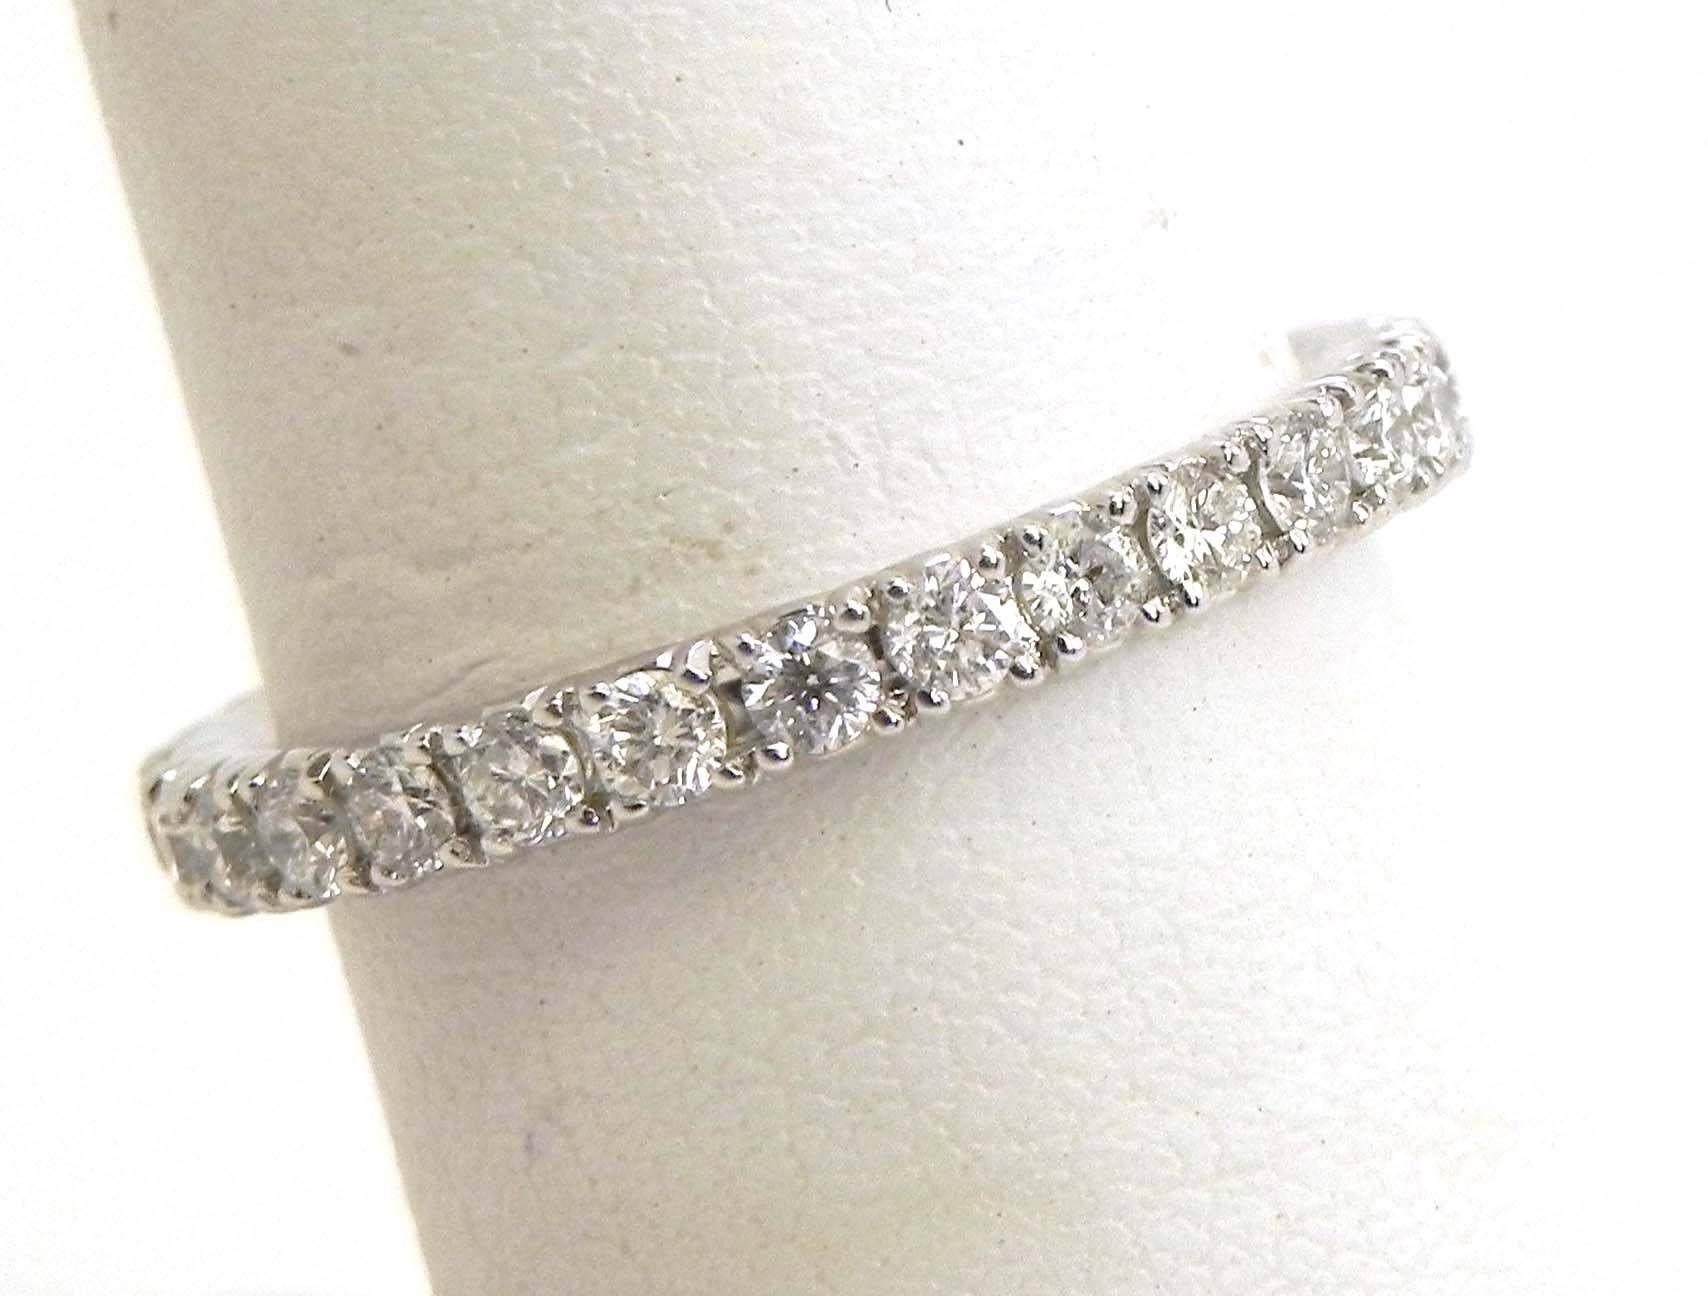 Ladies 18k White Gold Diamonds Eternity Wedding Band Ring | Bright Intended For Most Popular Diamond Eternity Wedding Bands (View 11 of 15)